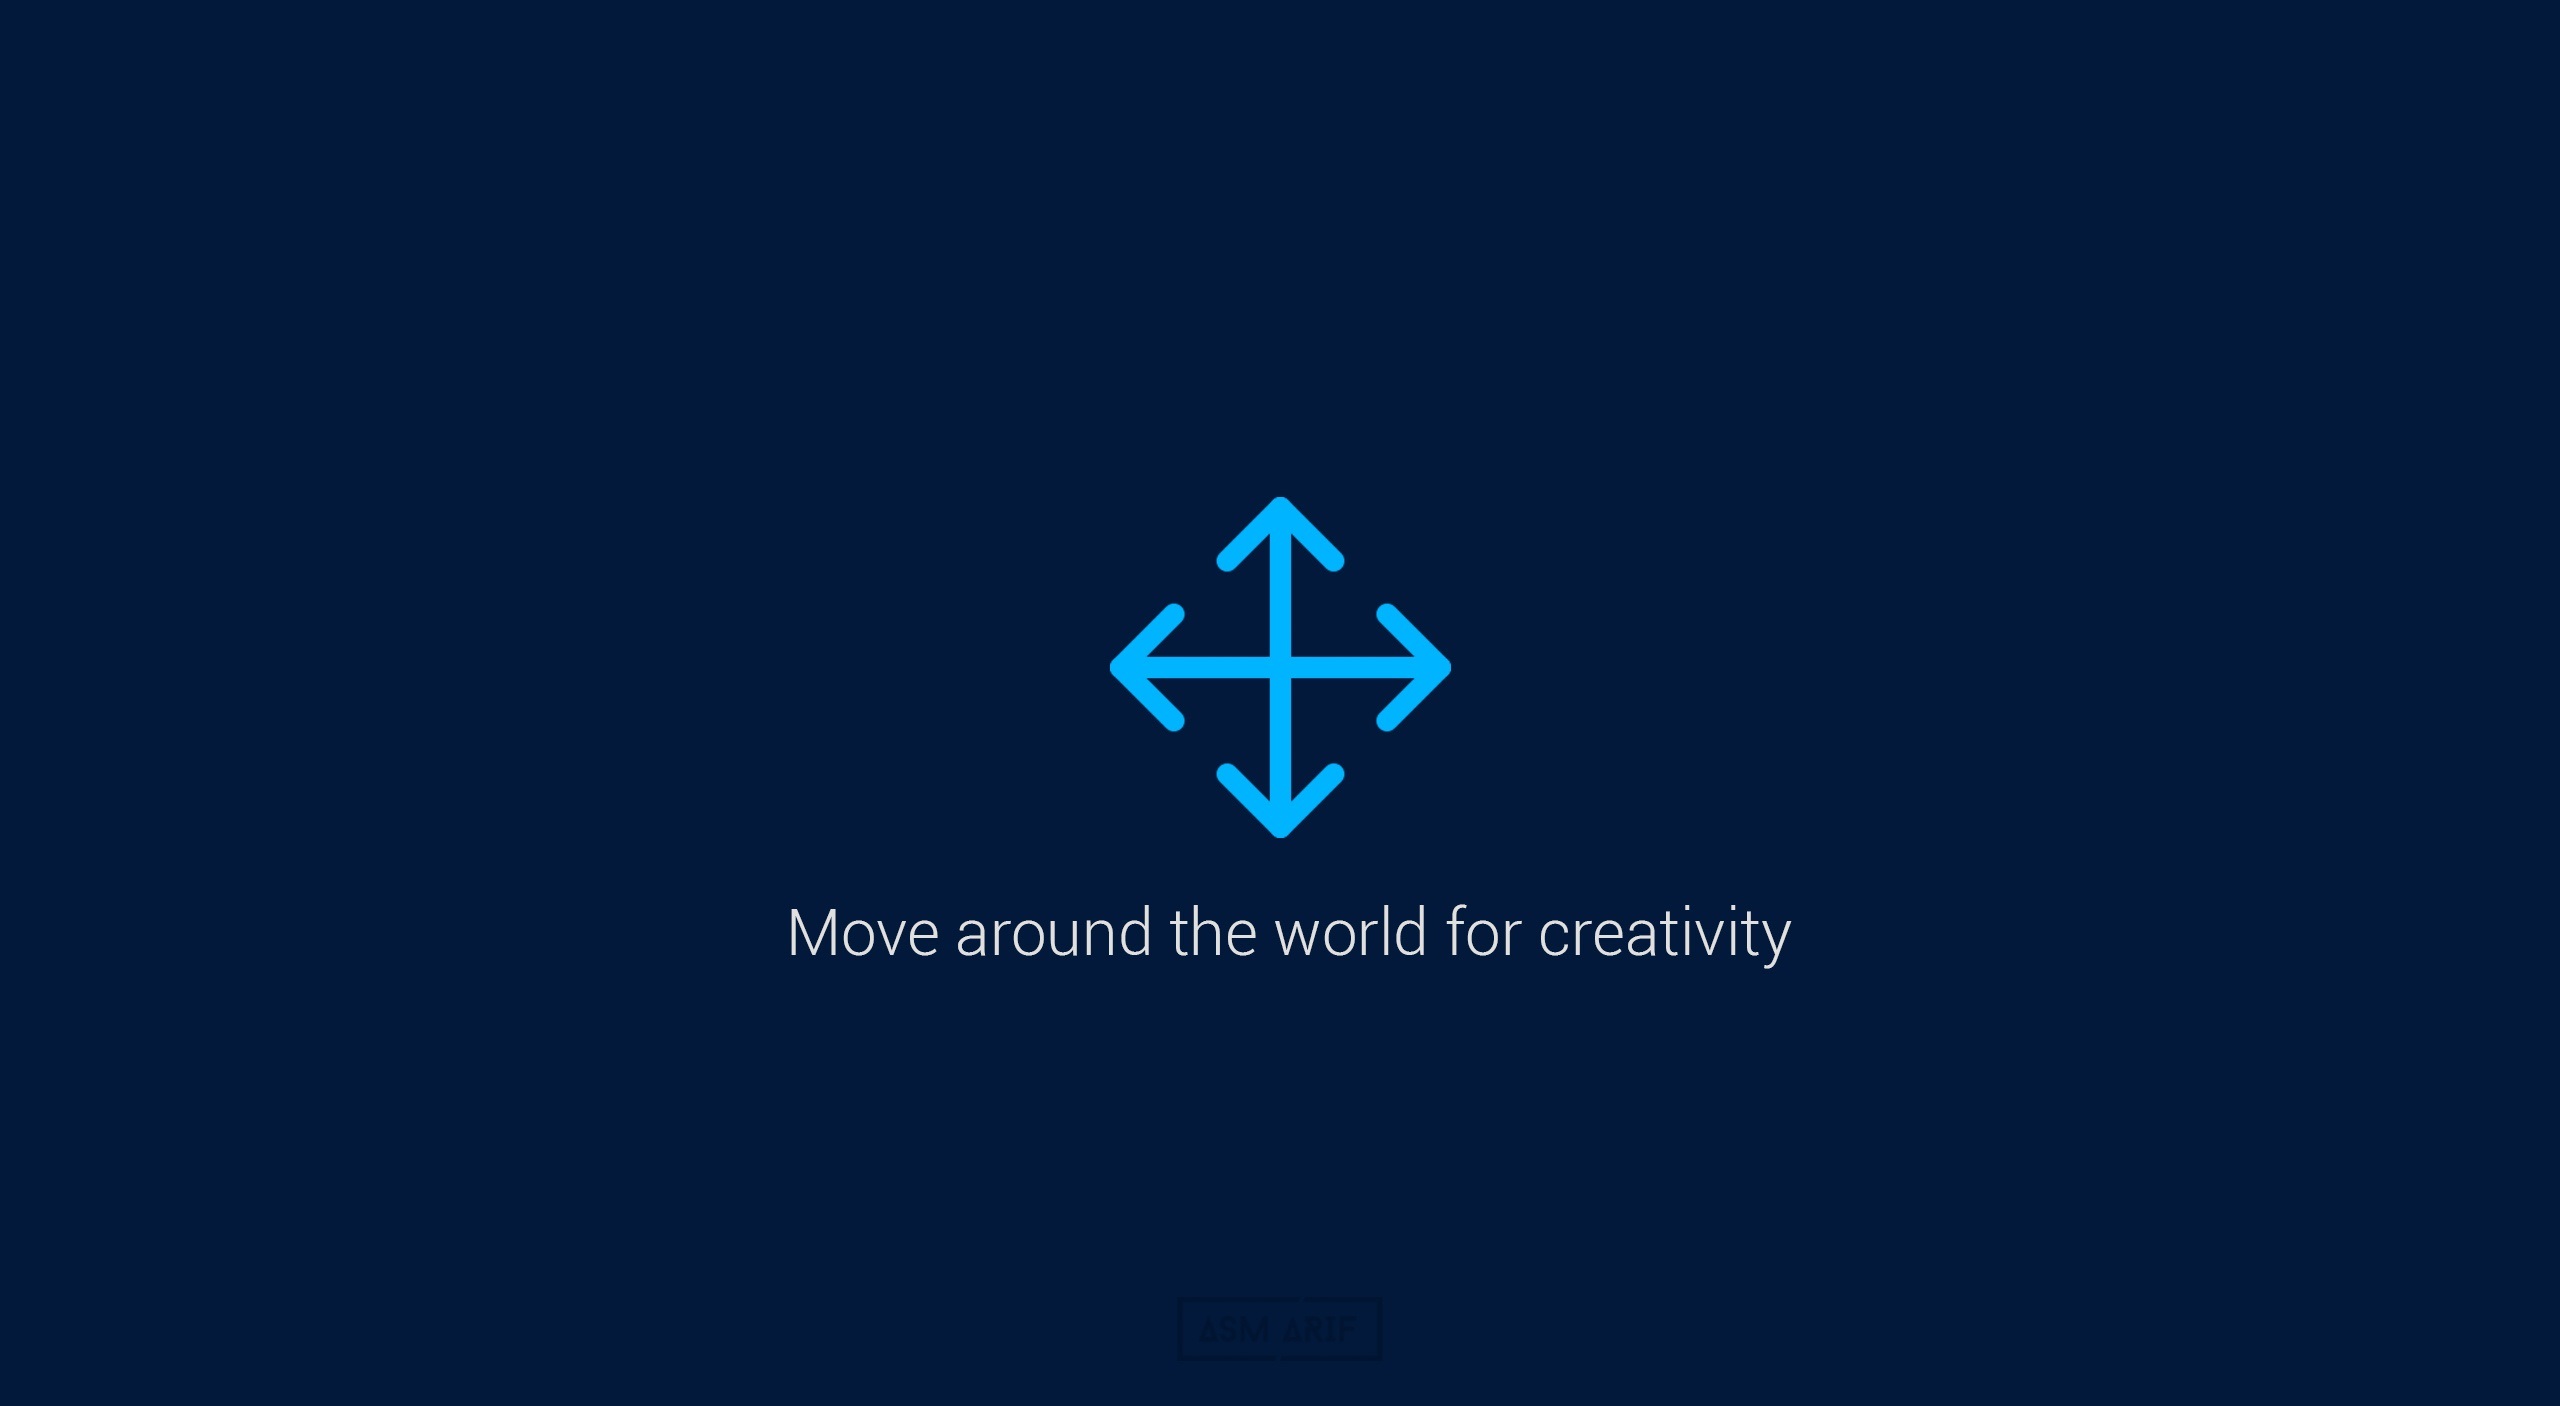 General 2560x1406 blue notes icons motivational text quote digital art simple background